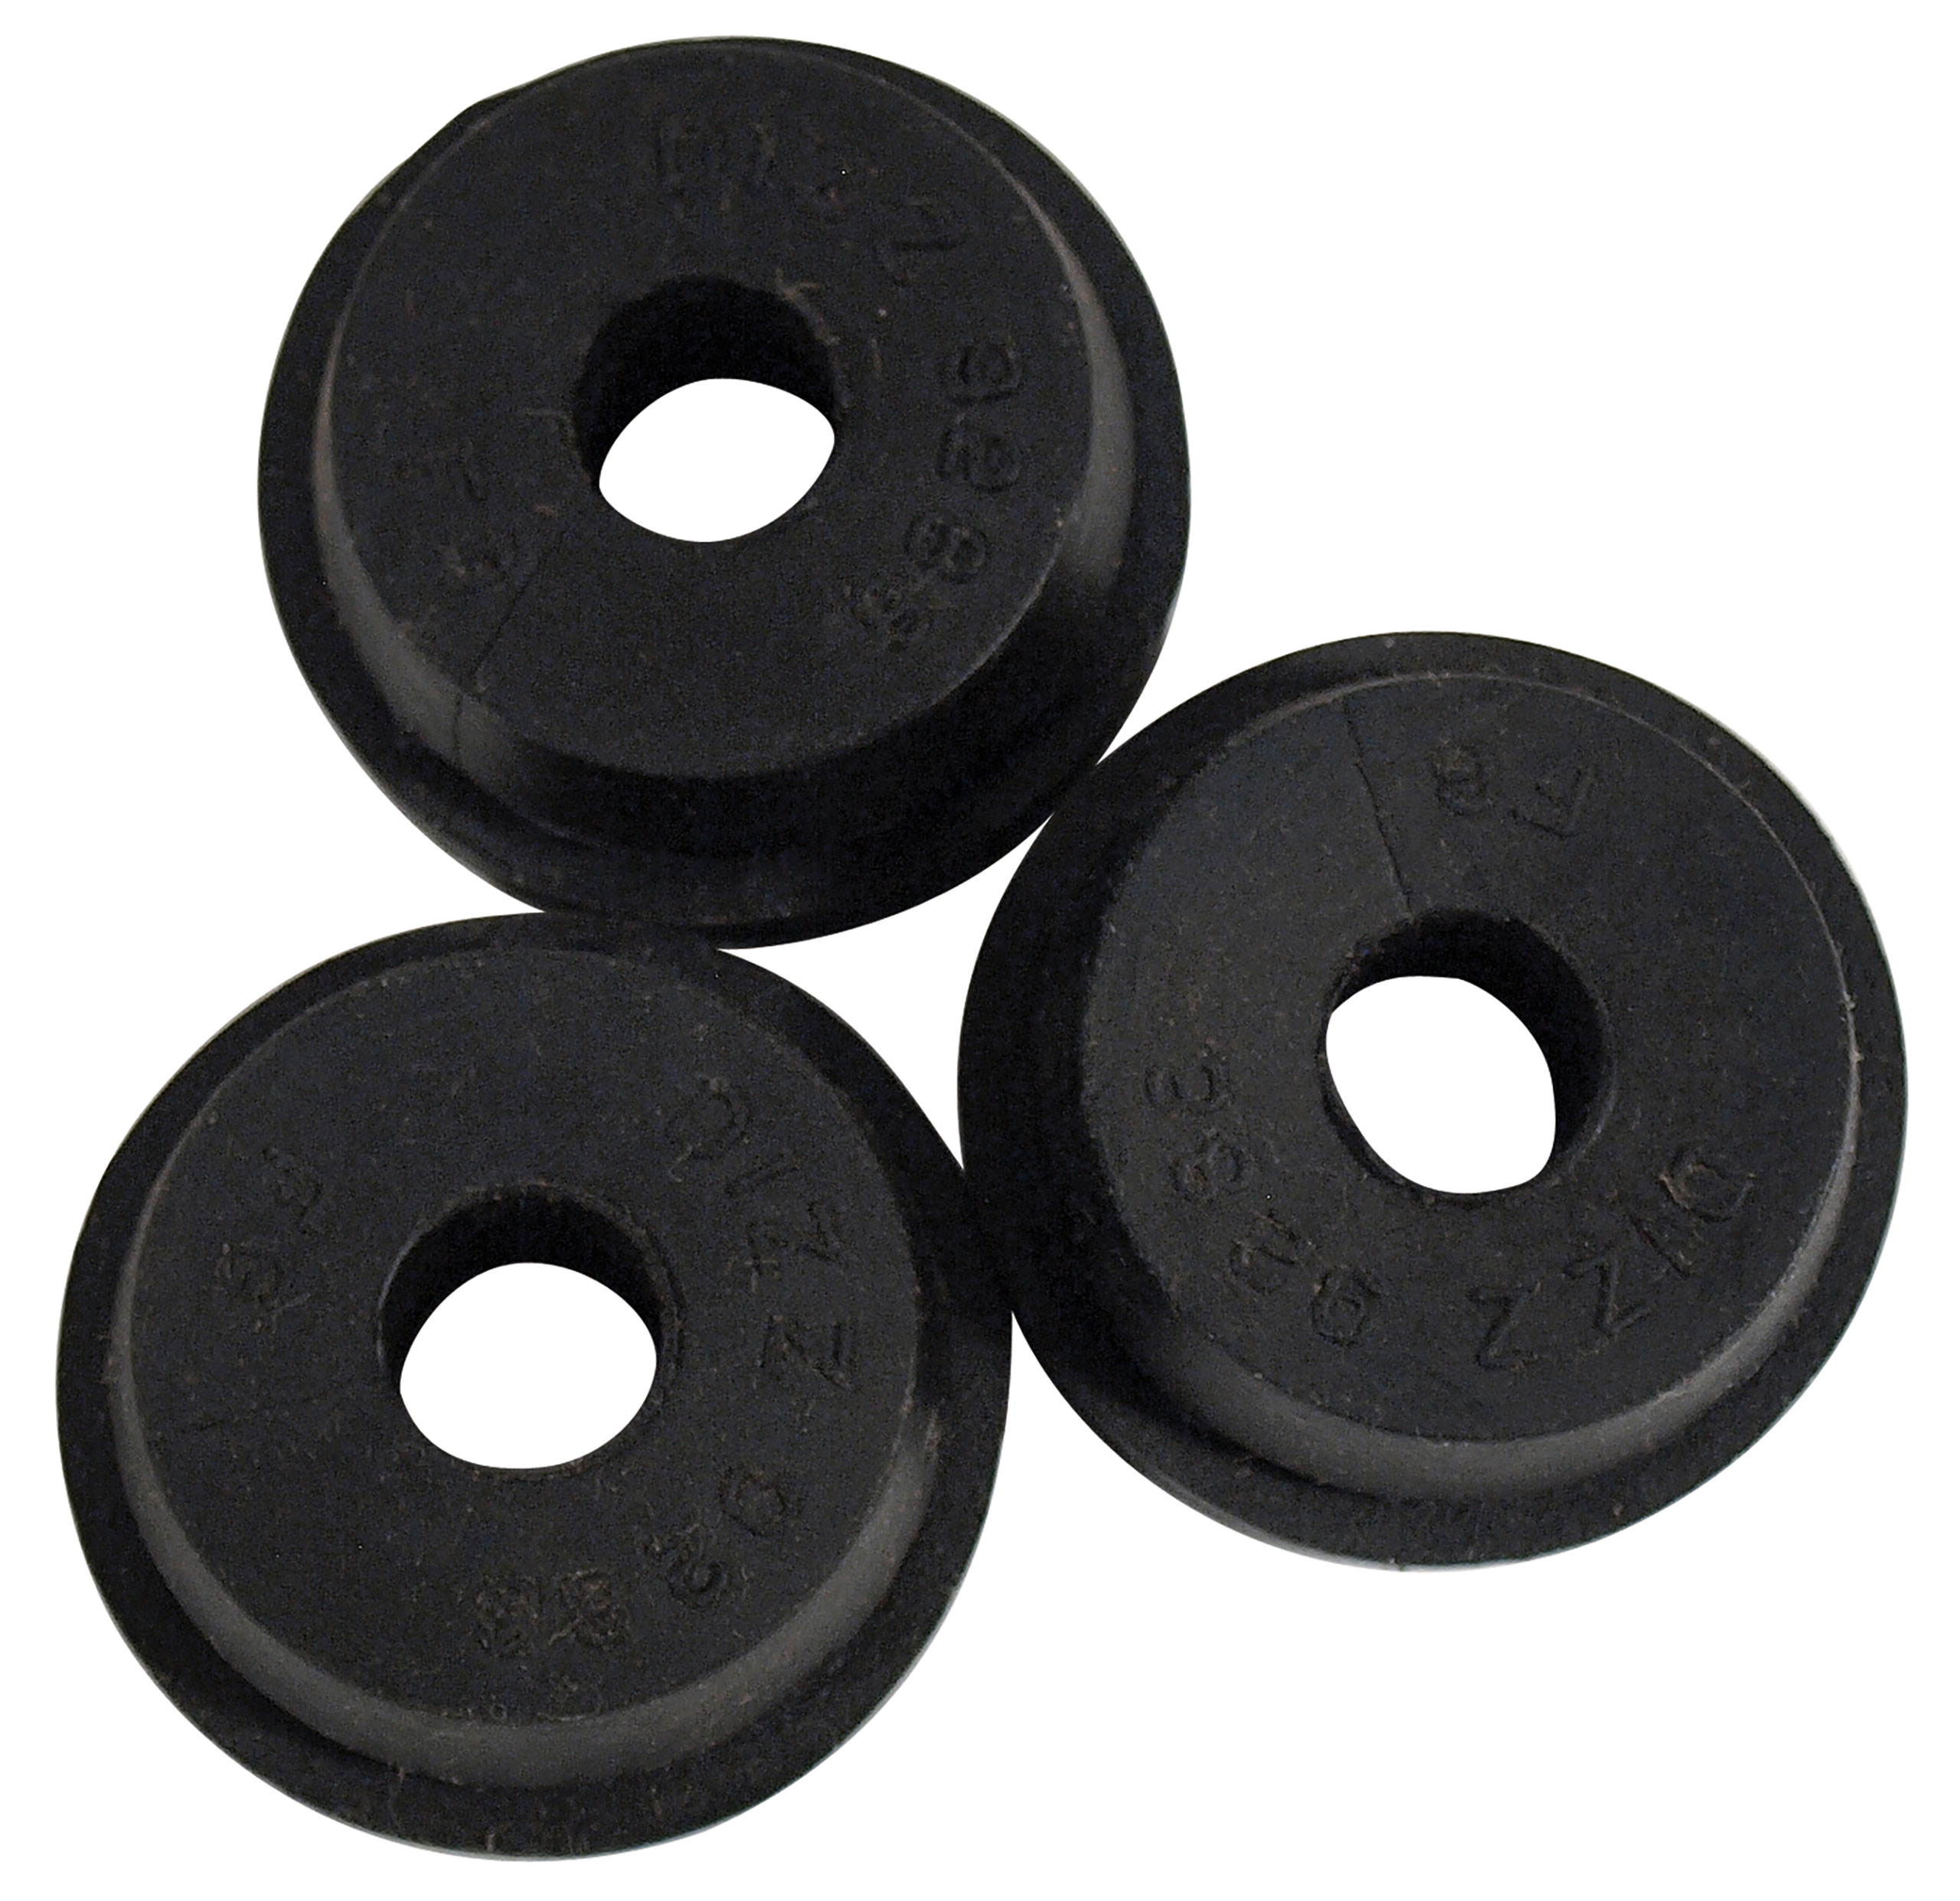 First Generation 1971-1973 Ford Mustang Fuel Line Grommets - 3 pieces - CA